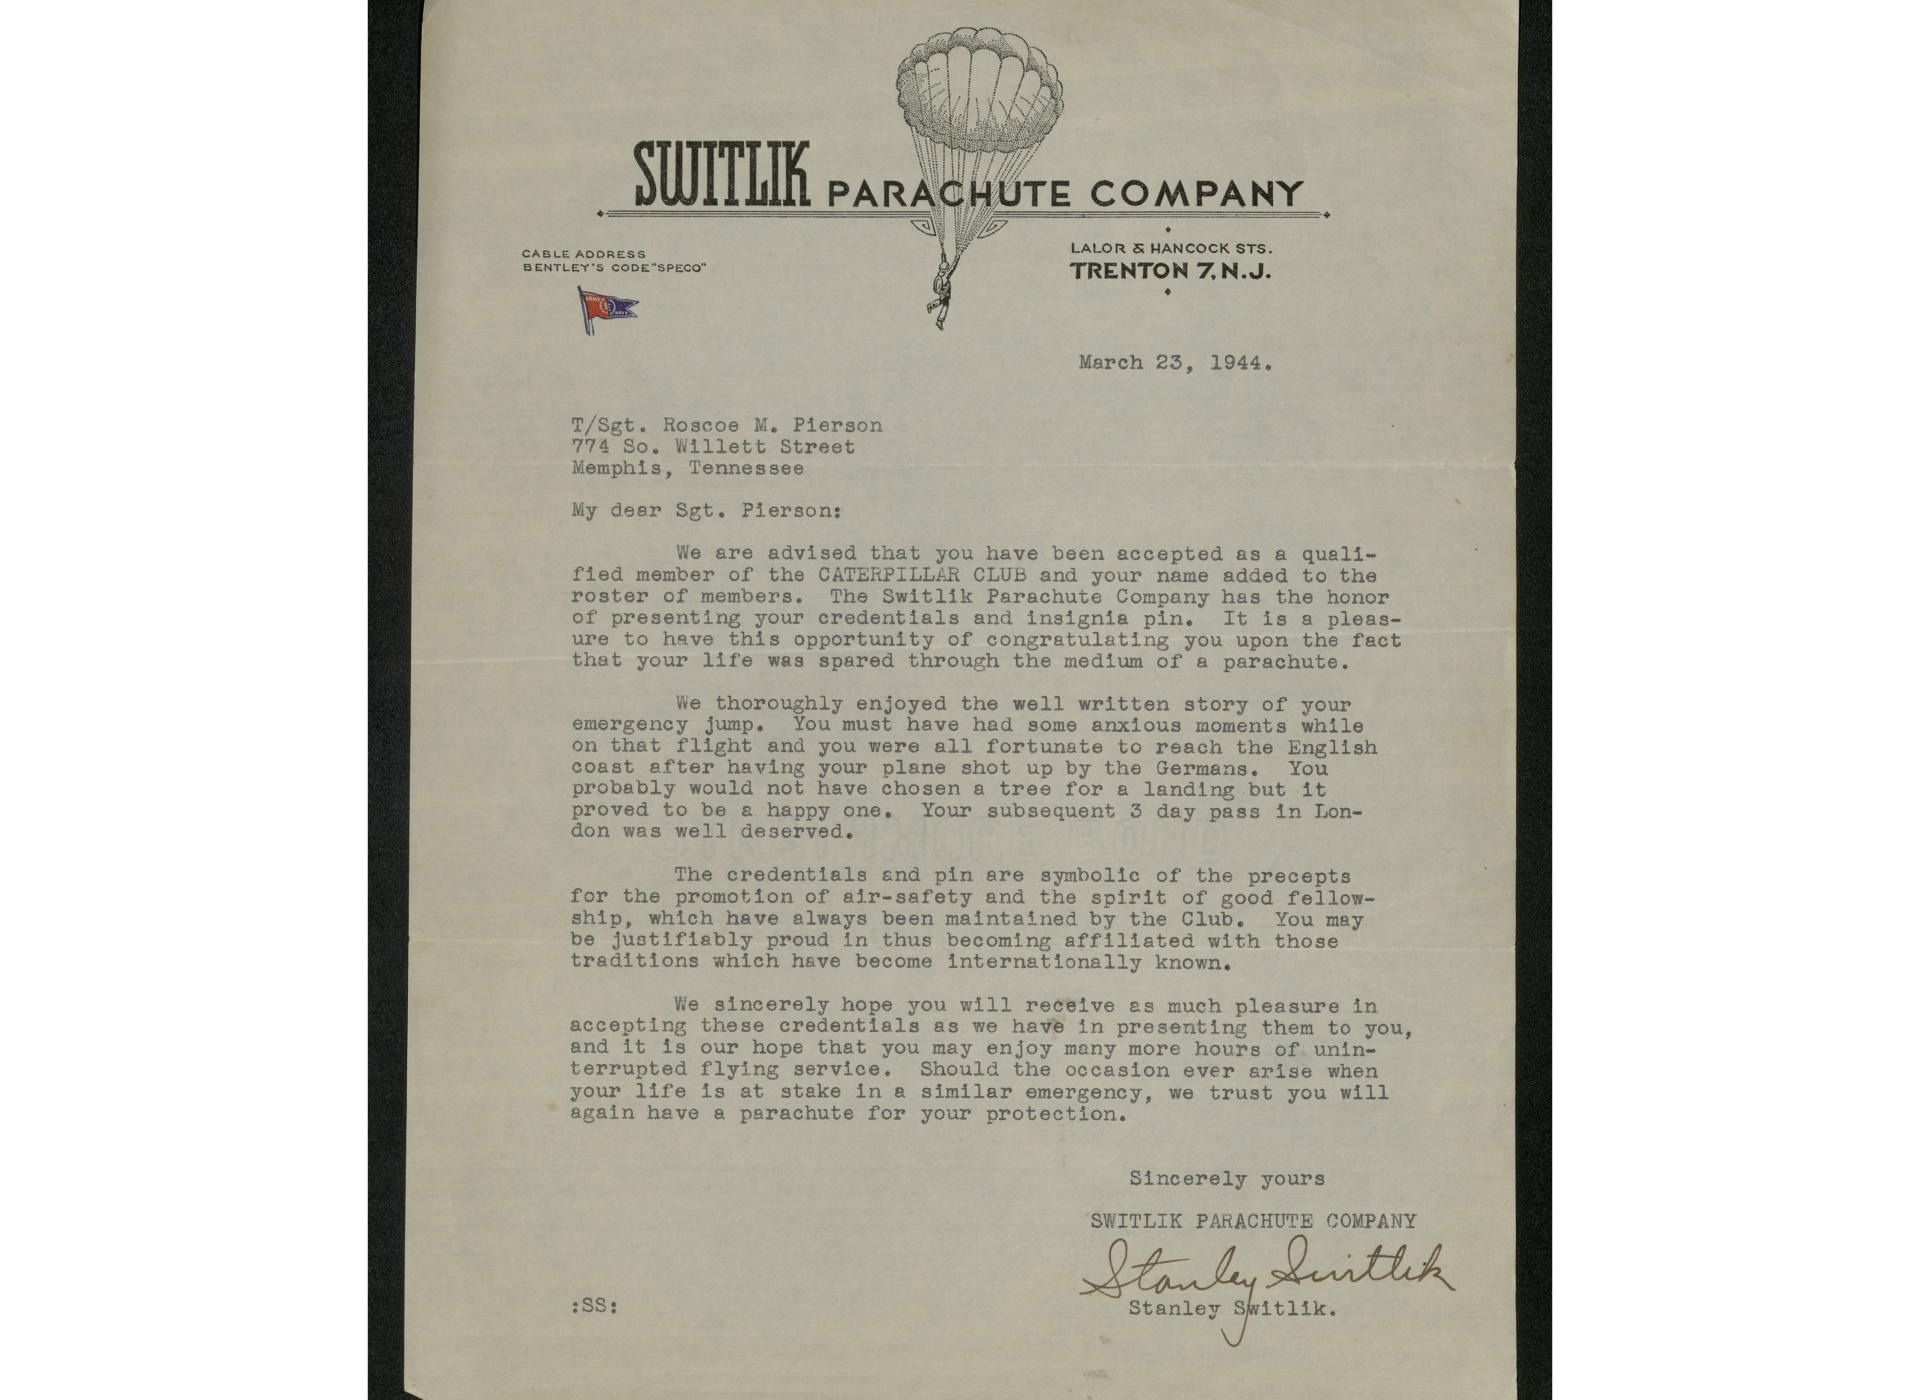 Membership letter of Technical Sergeant Roscoe Mitchell Pierson.